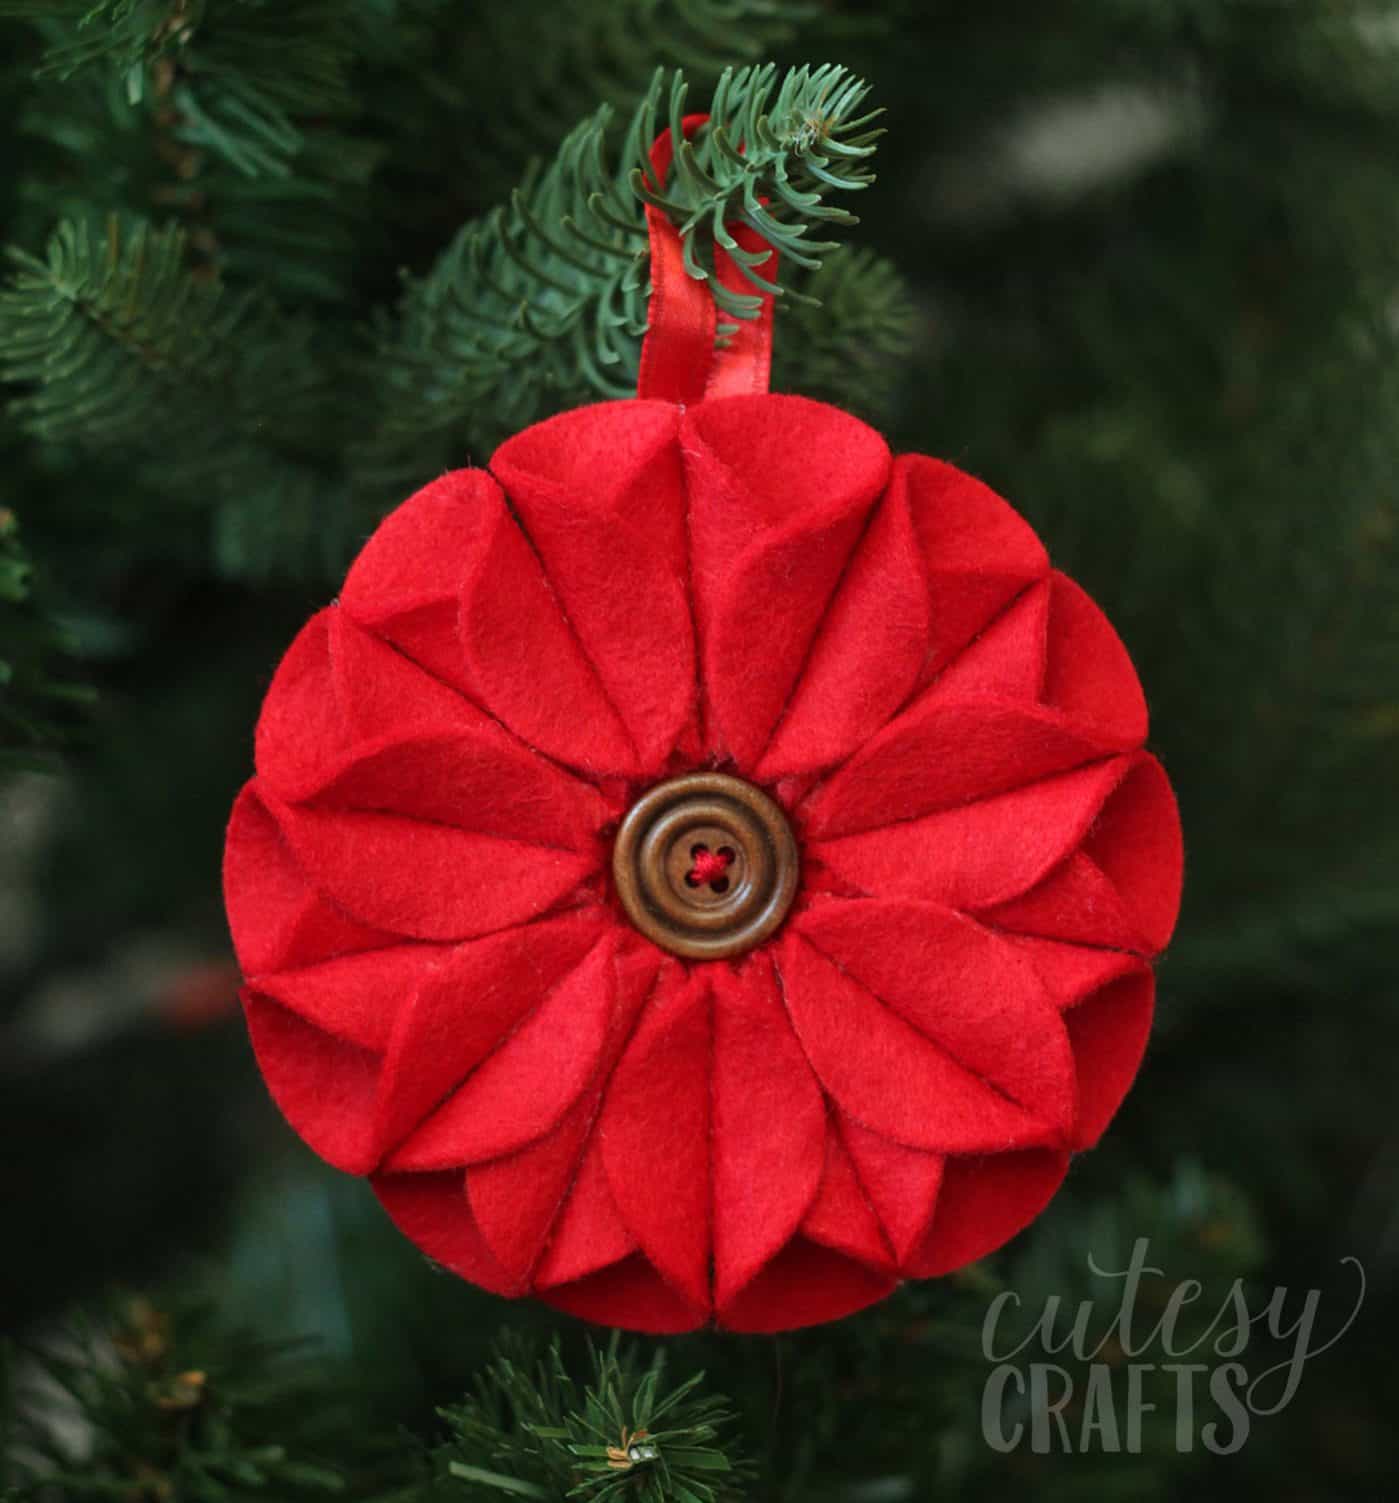 This felt Christmas ornament inspired by poinsettias was a lot of fun to make, and it was really easy too! No sewing required.